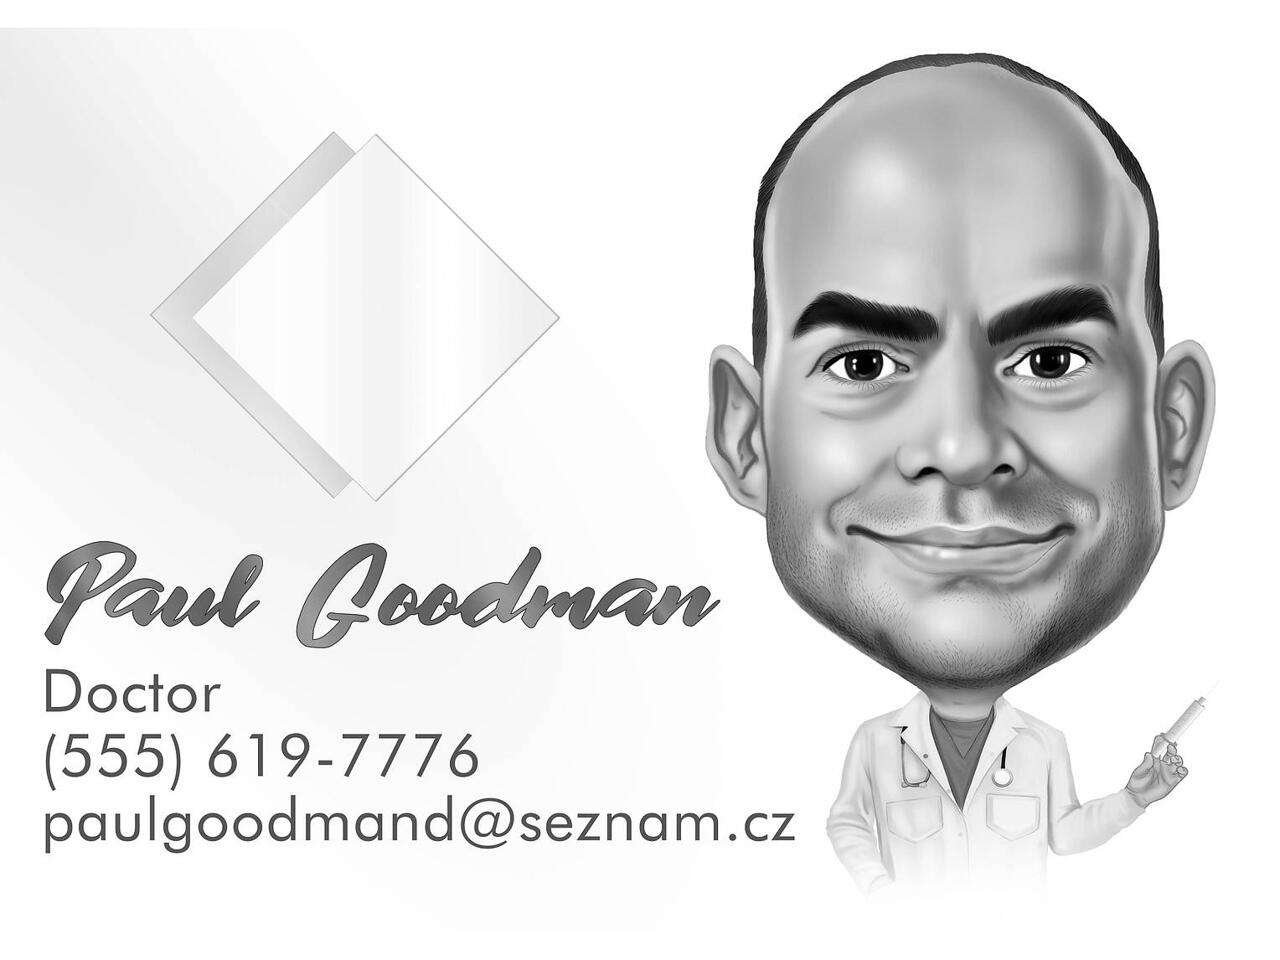 caricature business cards 5